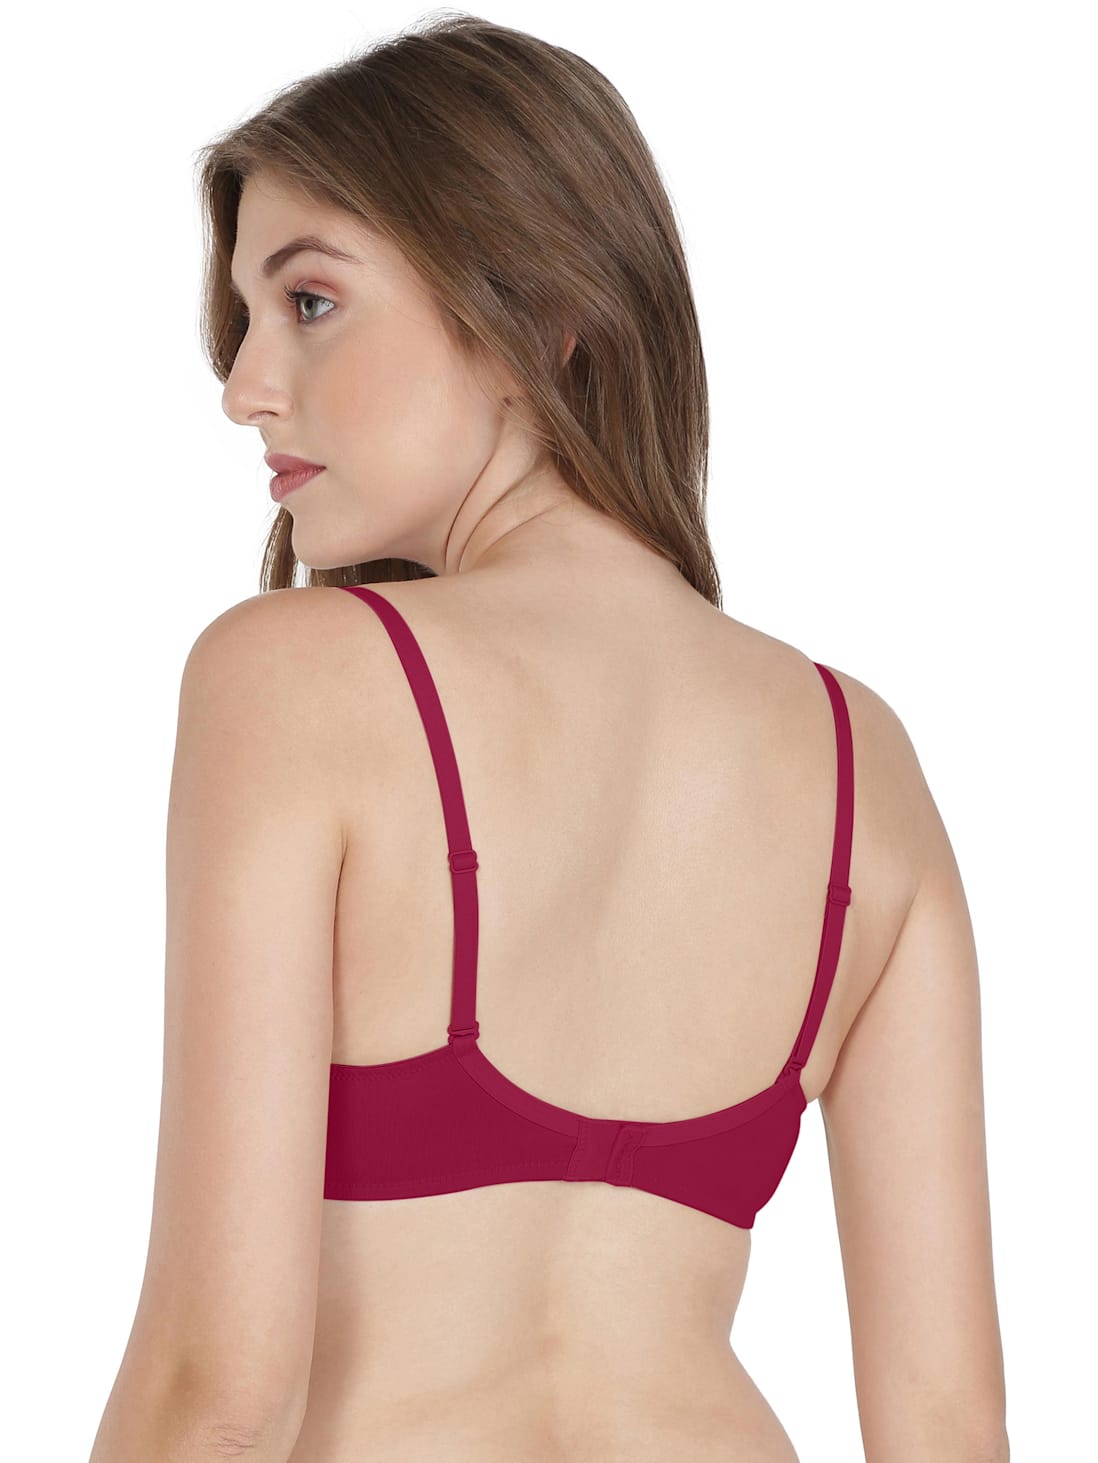 JOCKEY Beet Red Full coverage non wired T shirt Bra (34C) in Bangalore at  best price by Vinayaka Garments - Justdial